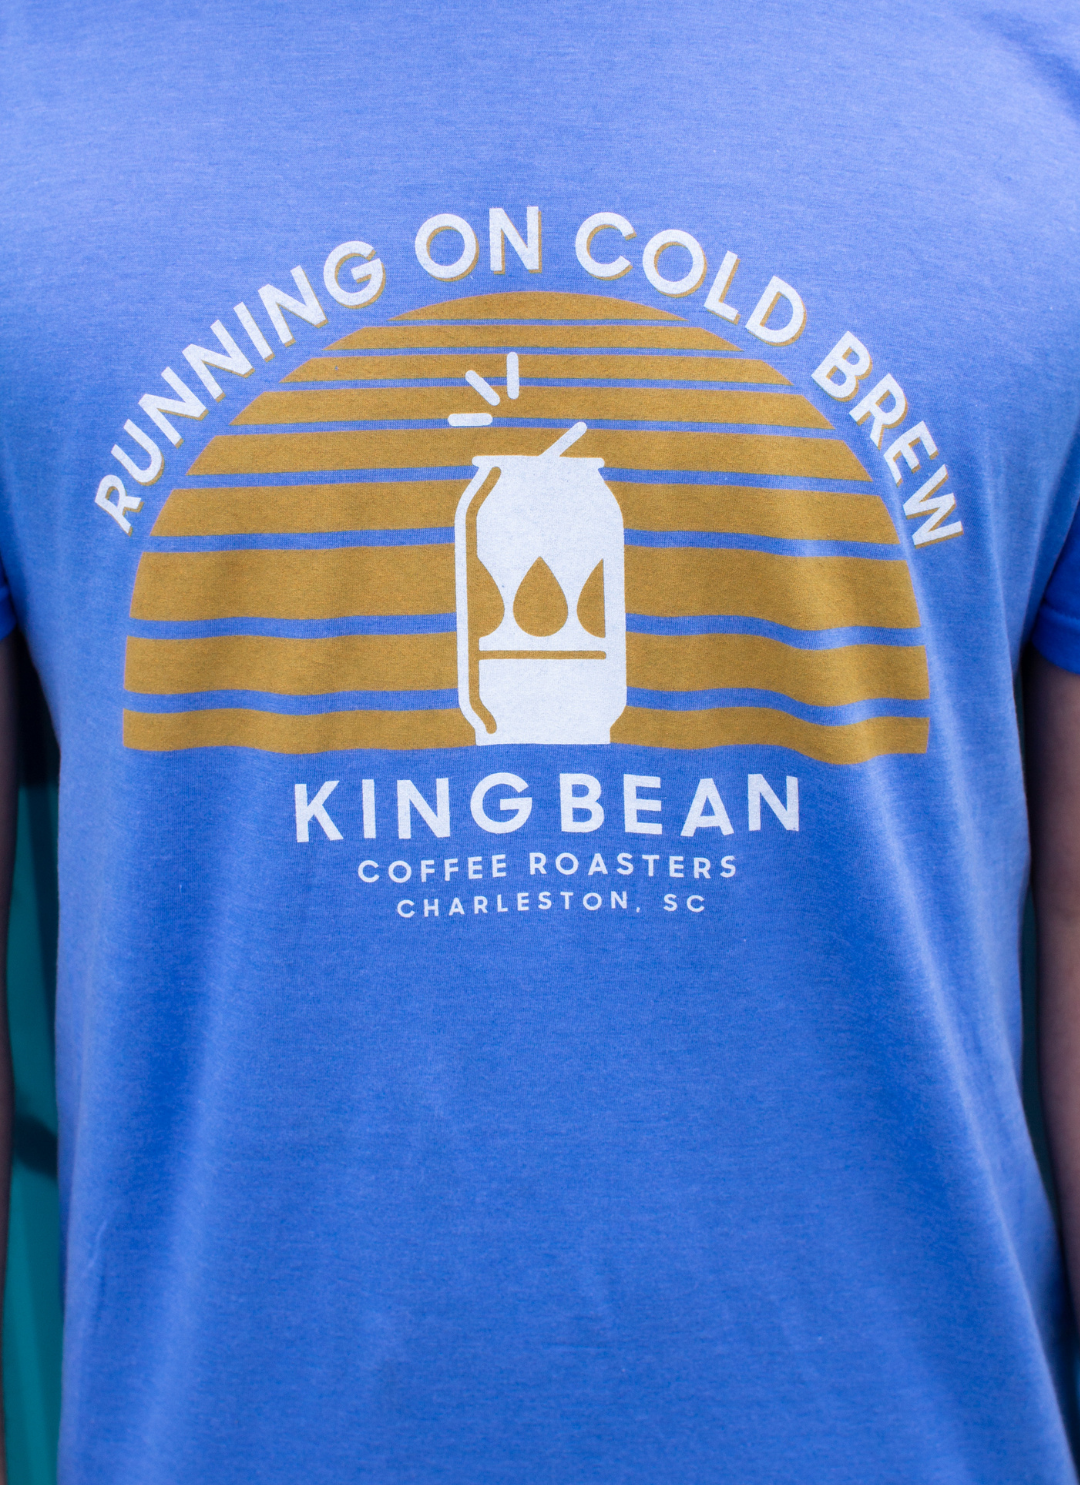 Running on Cold Brew Vintage T-Shirt